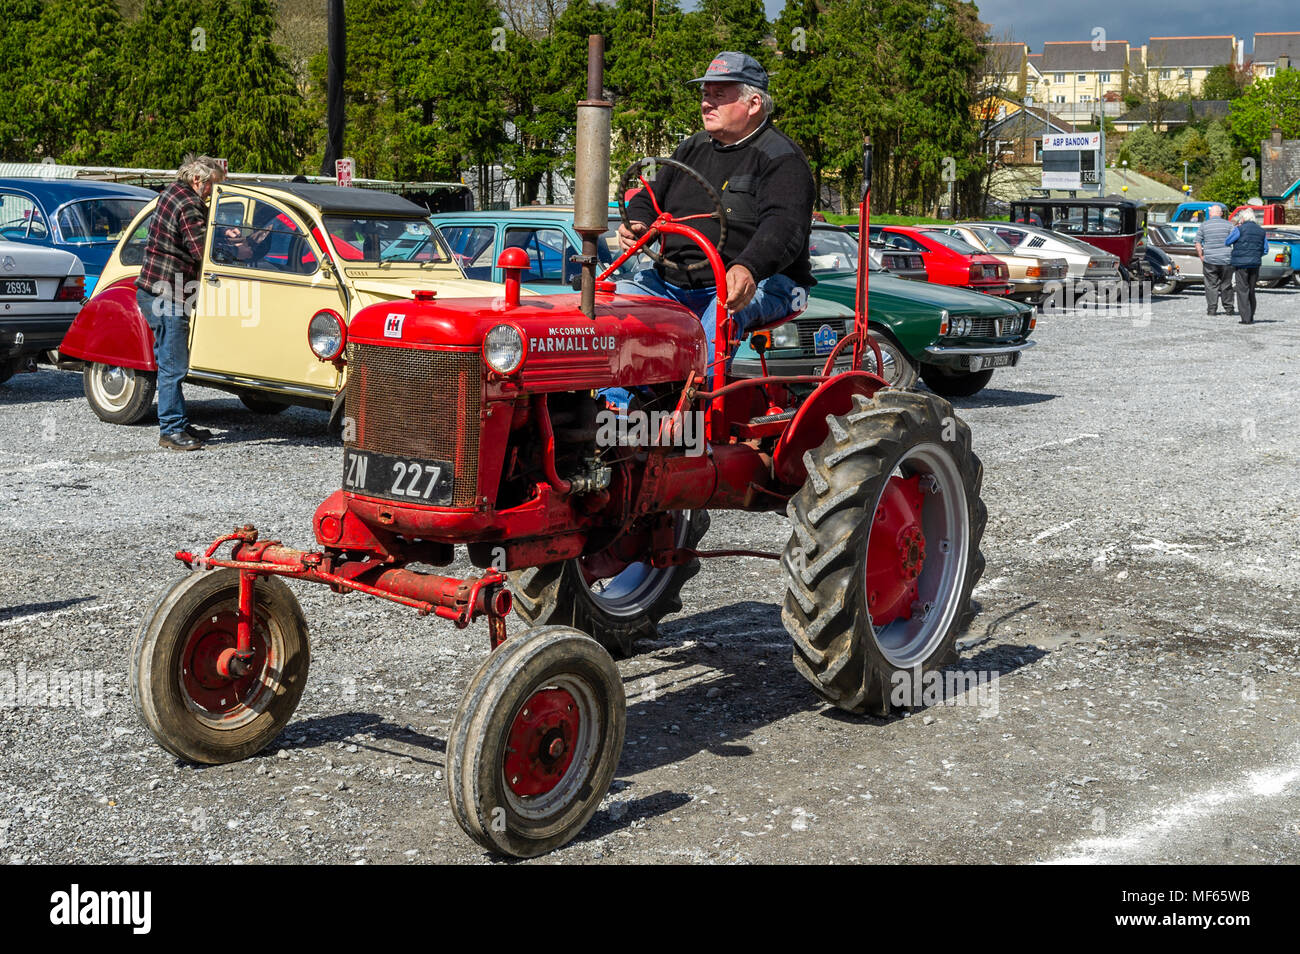 Vintage 1952 McCormick Tractor being driven at a vintage car show in Bandon, County Cork, Ireland. Stock Photo